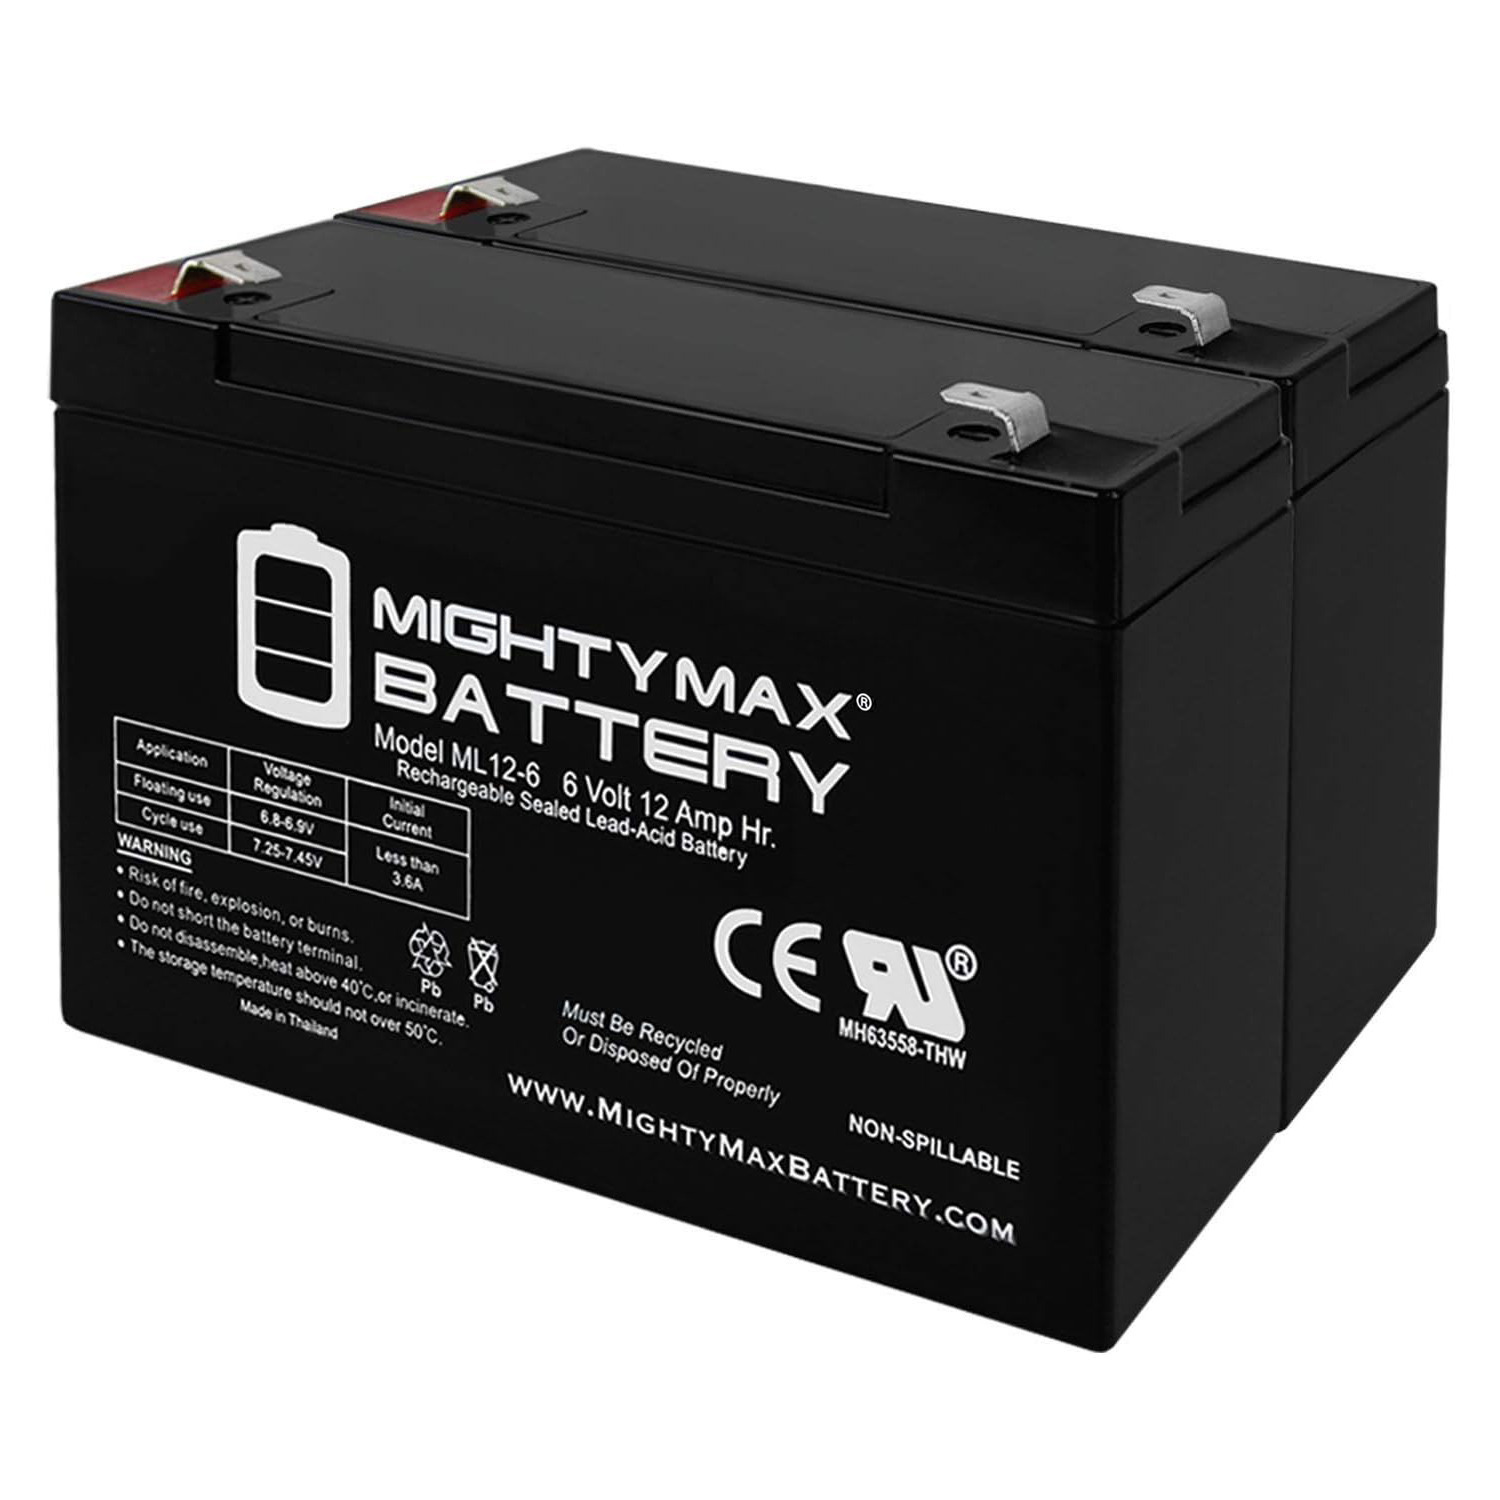 6V 12AH F2 Replacement Battery for Portalac GS PE10612 - 2 Pack